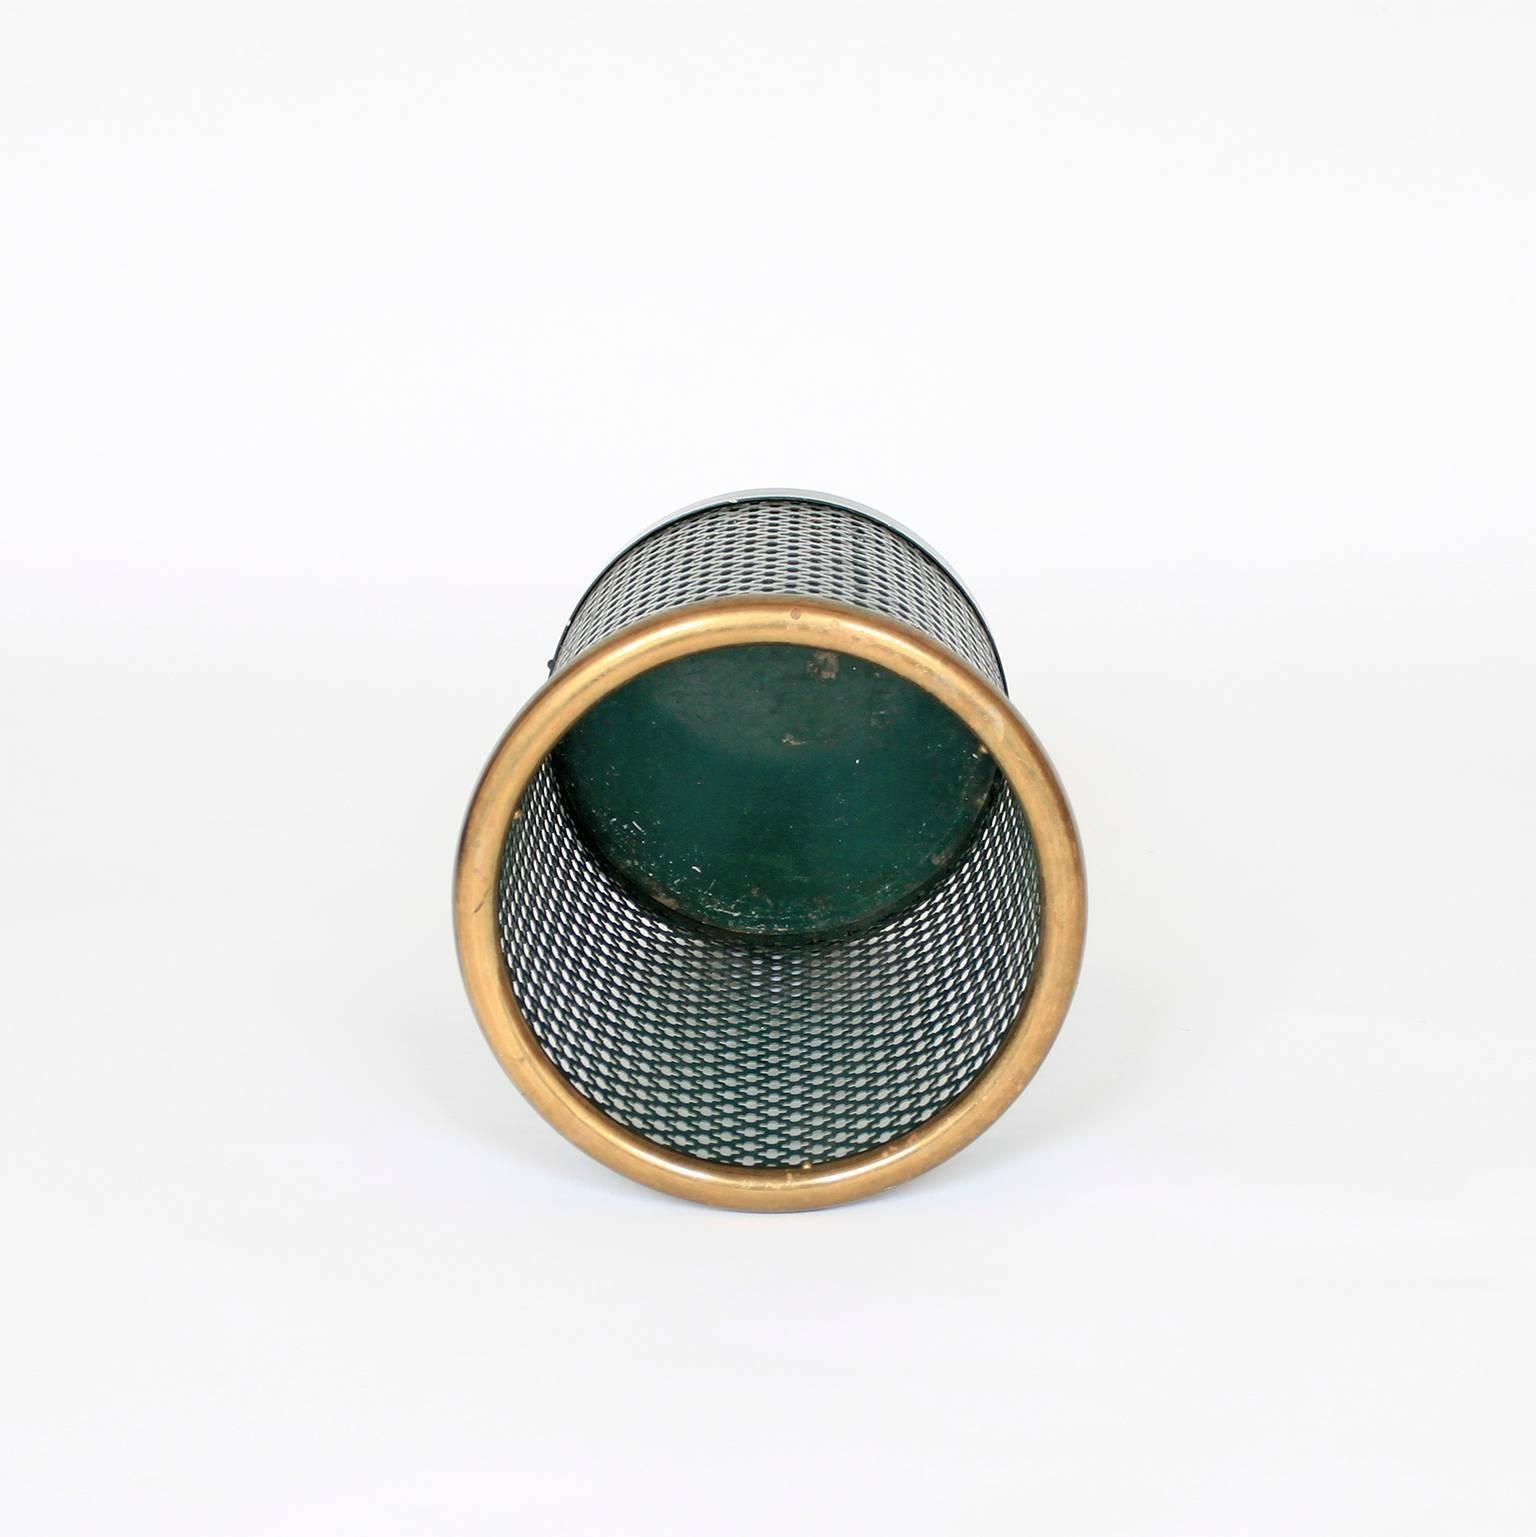 An old green-lacquered steel and brass waste basket from Sweden by Josef Frank for Svenskt Tenn from the 1940s. Delicately patinated and delightfully blemished. Perfect for a stylish home office.